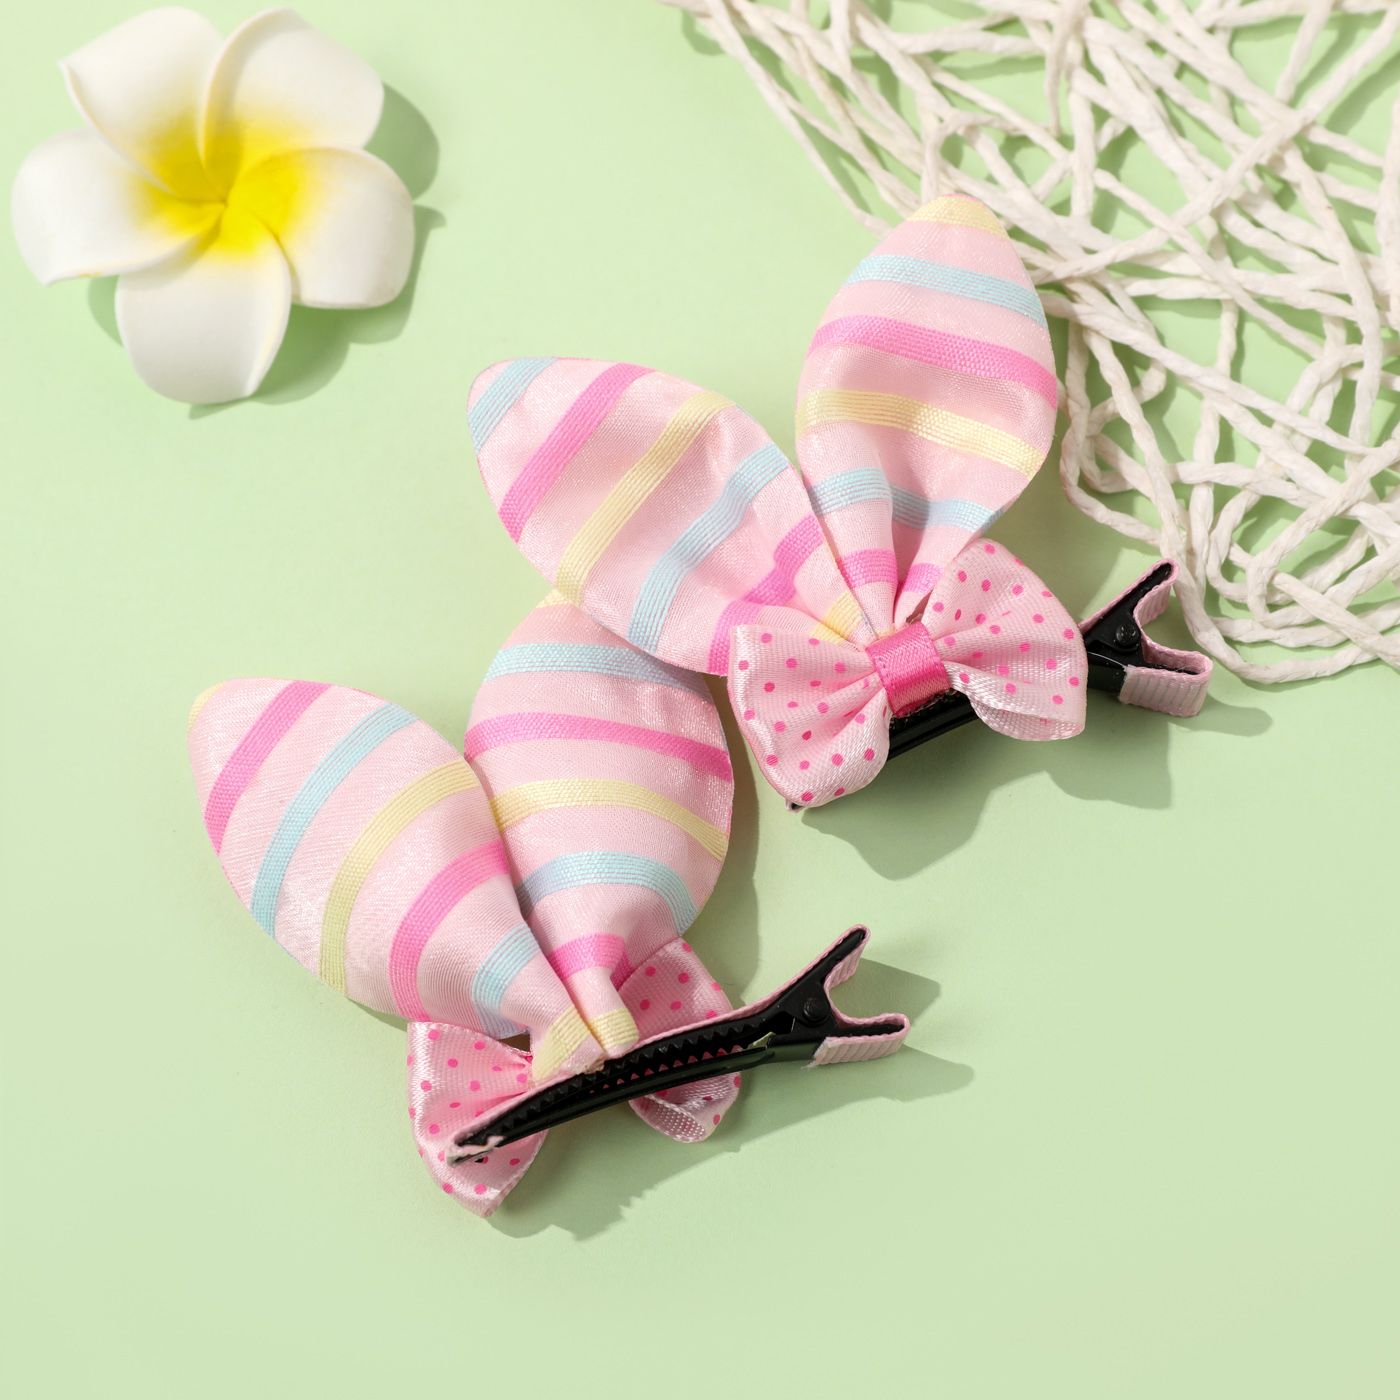 2-pack Bow Bunny Ears Hair Clips Hair Accessories for Girls product